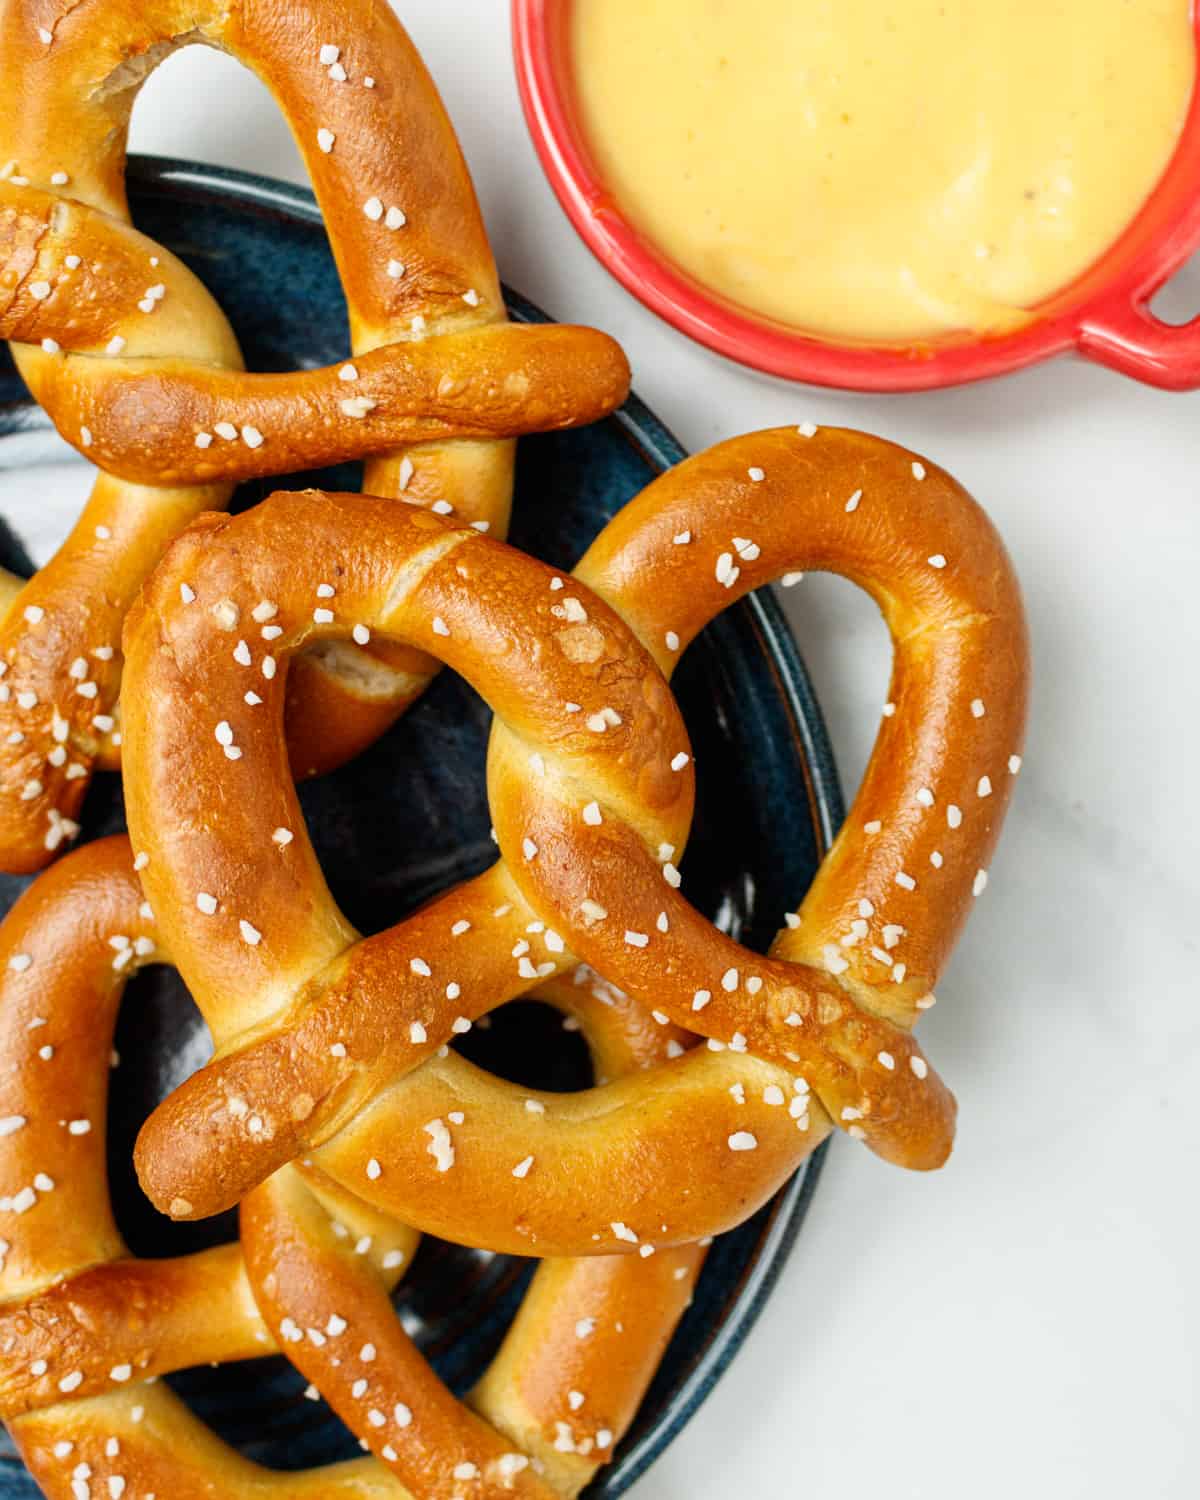 Three soft pretzels on a dark blue plate sitting on a white background. A small red bowl of mustard is in the top right of the photo.